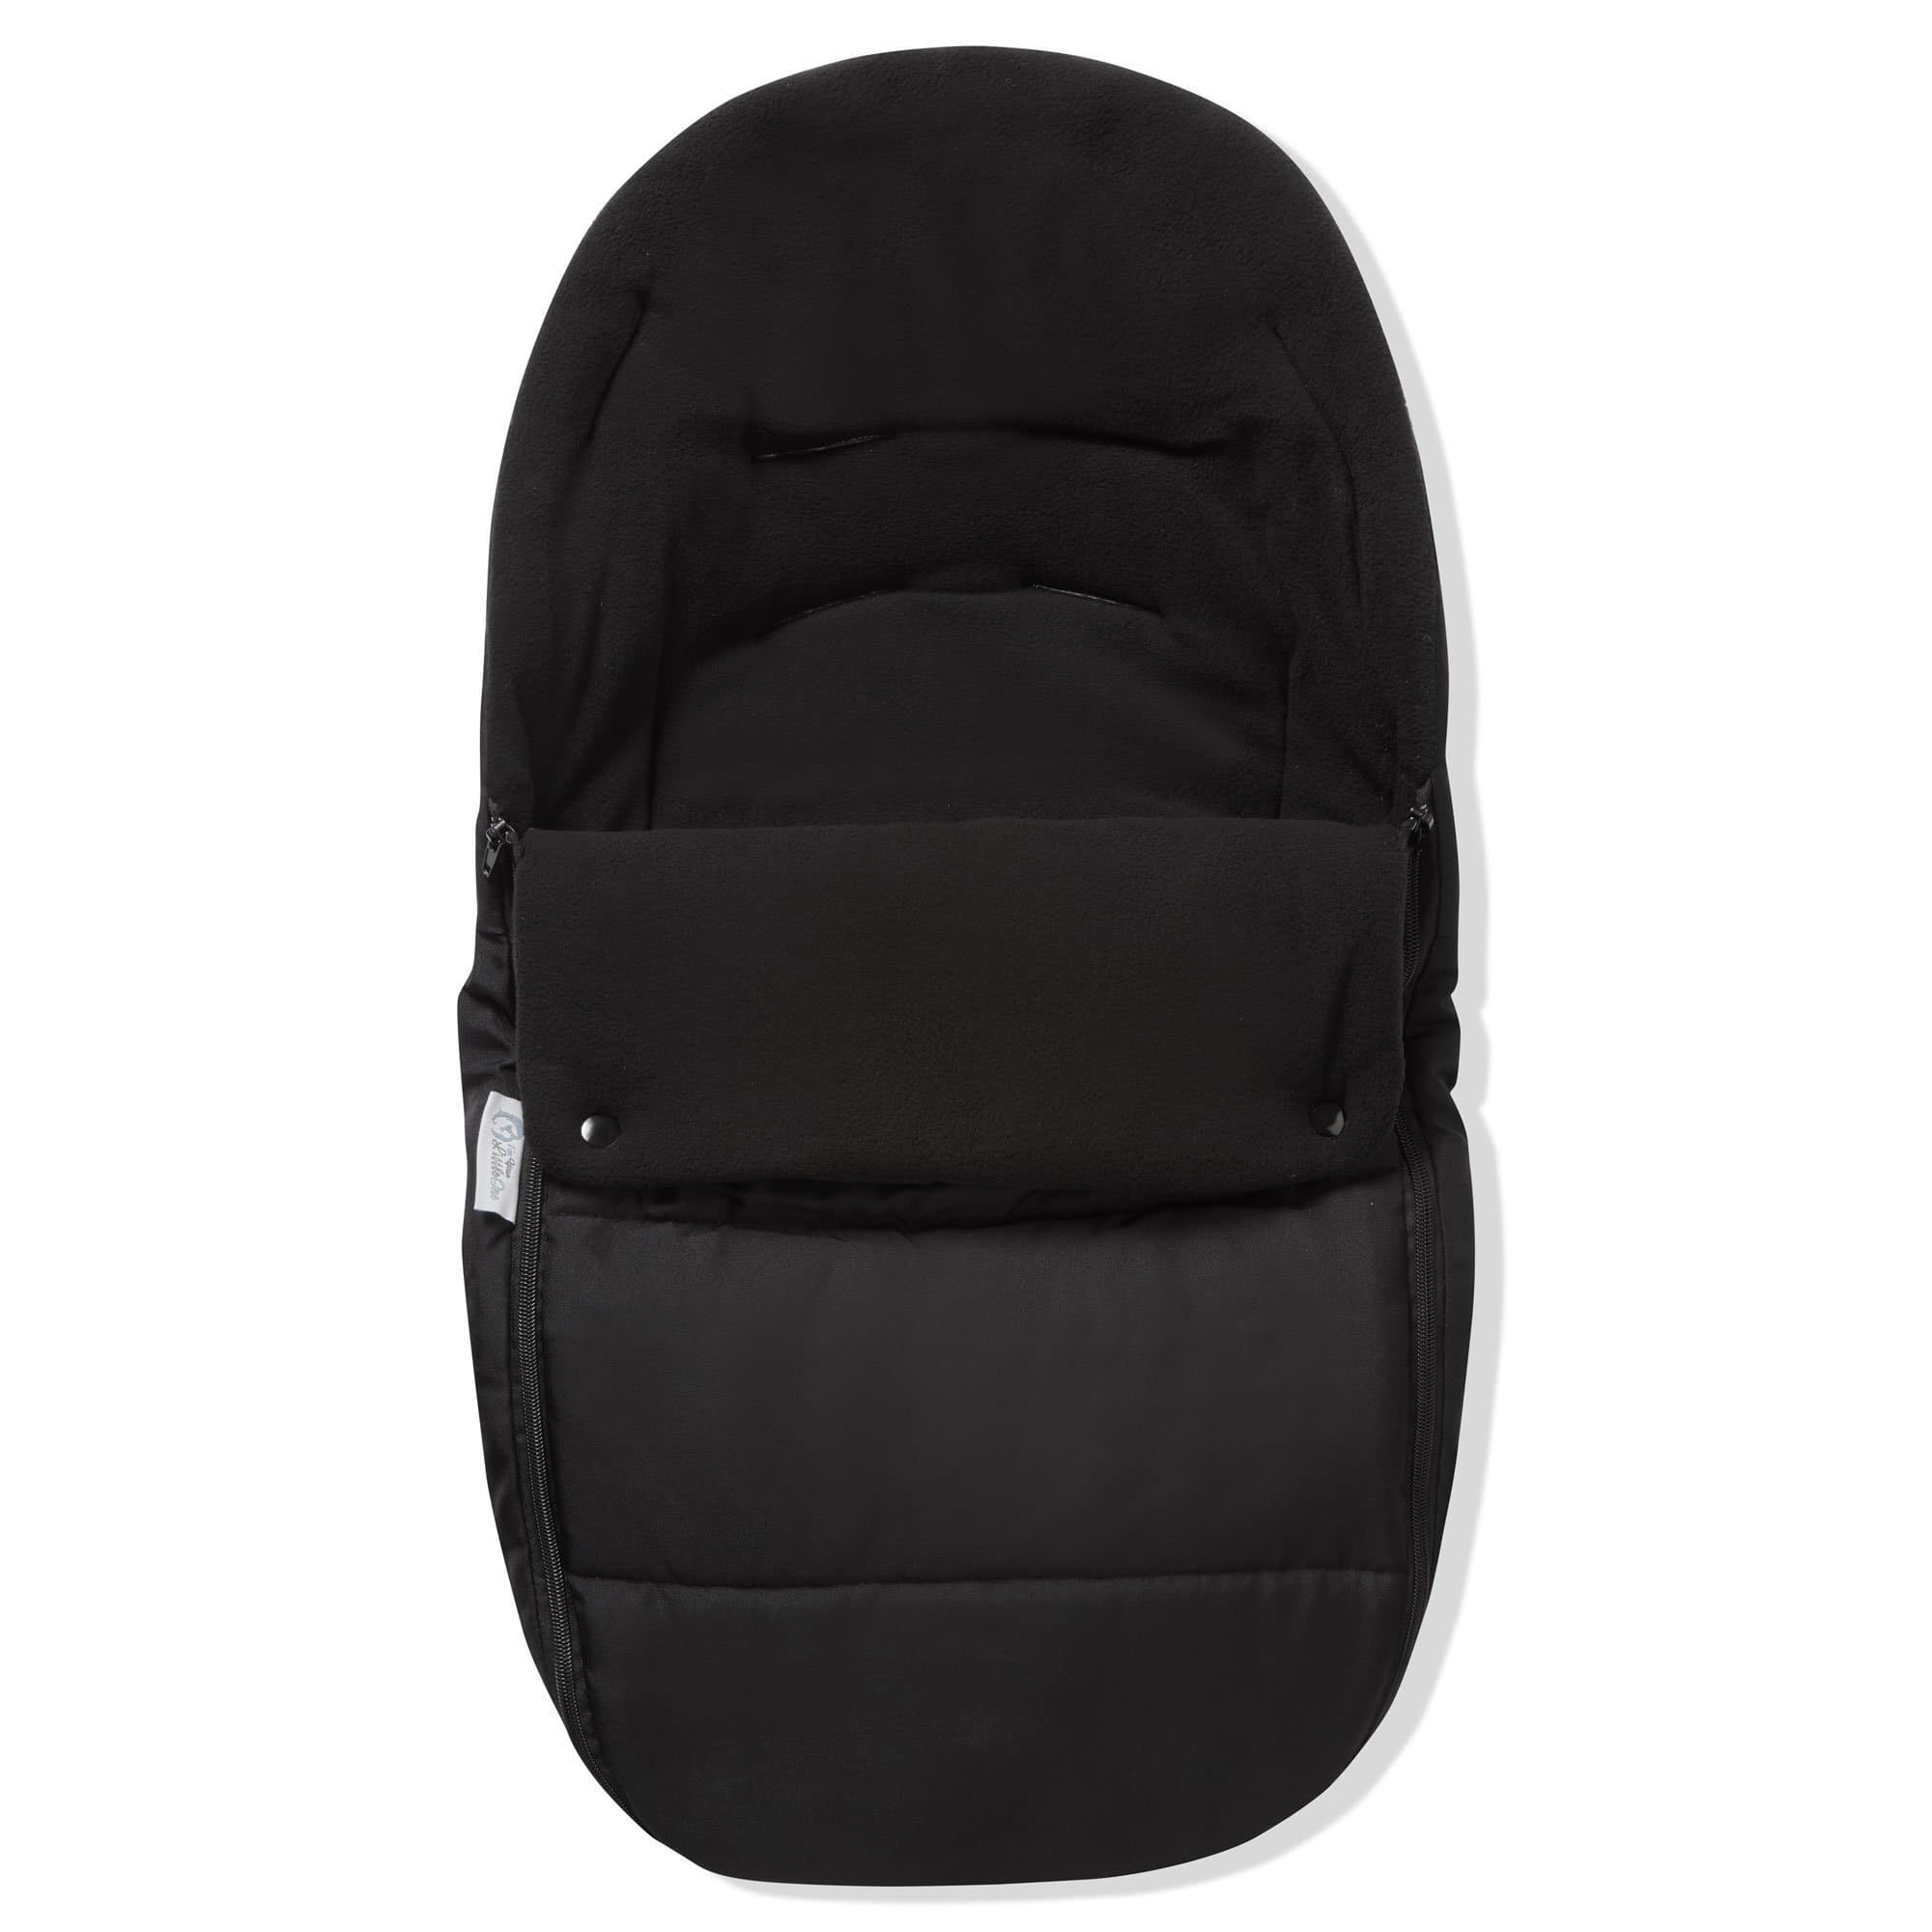 Premium Car Seat Footmuff / Cosy Toes Compatible With Mutsy - Black Jack / Fits All Models | For Your Little One